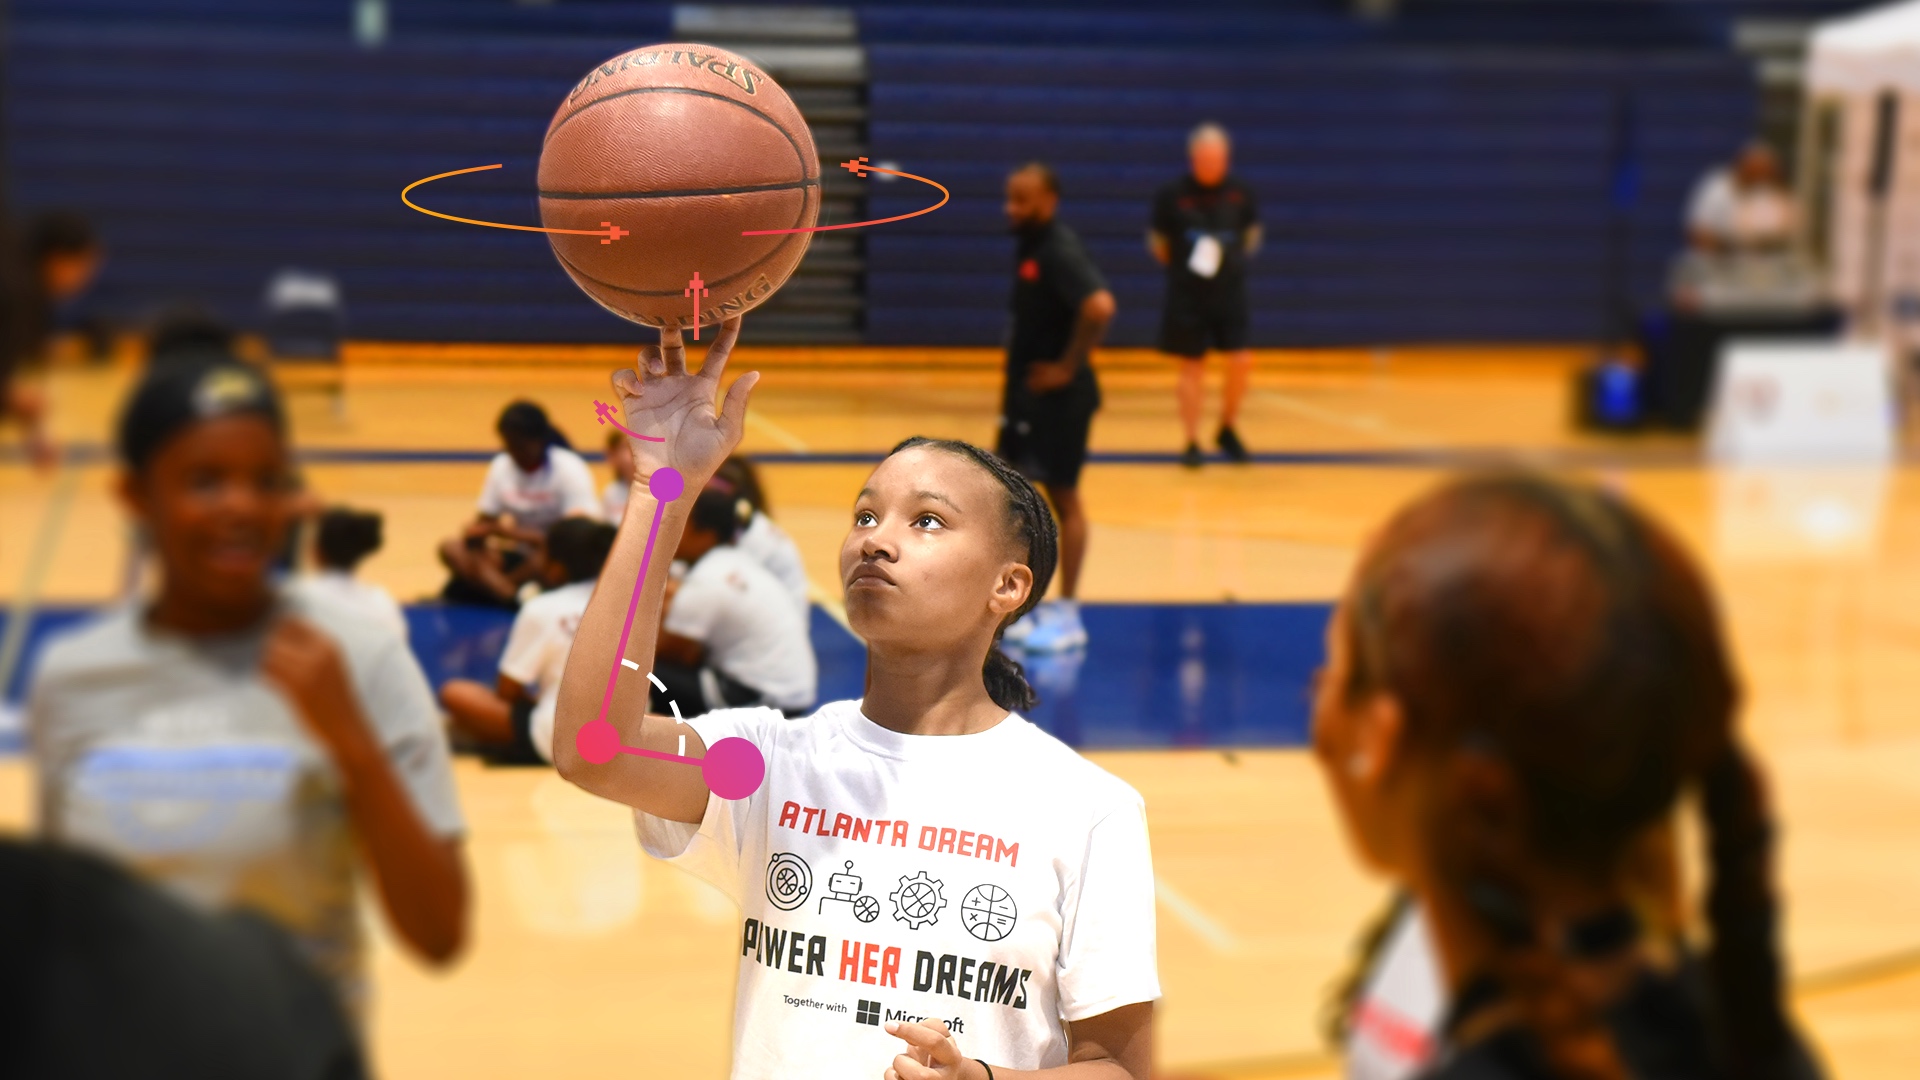 A girl is holding a basketball in front of a group of people.